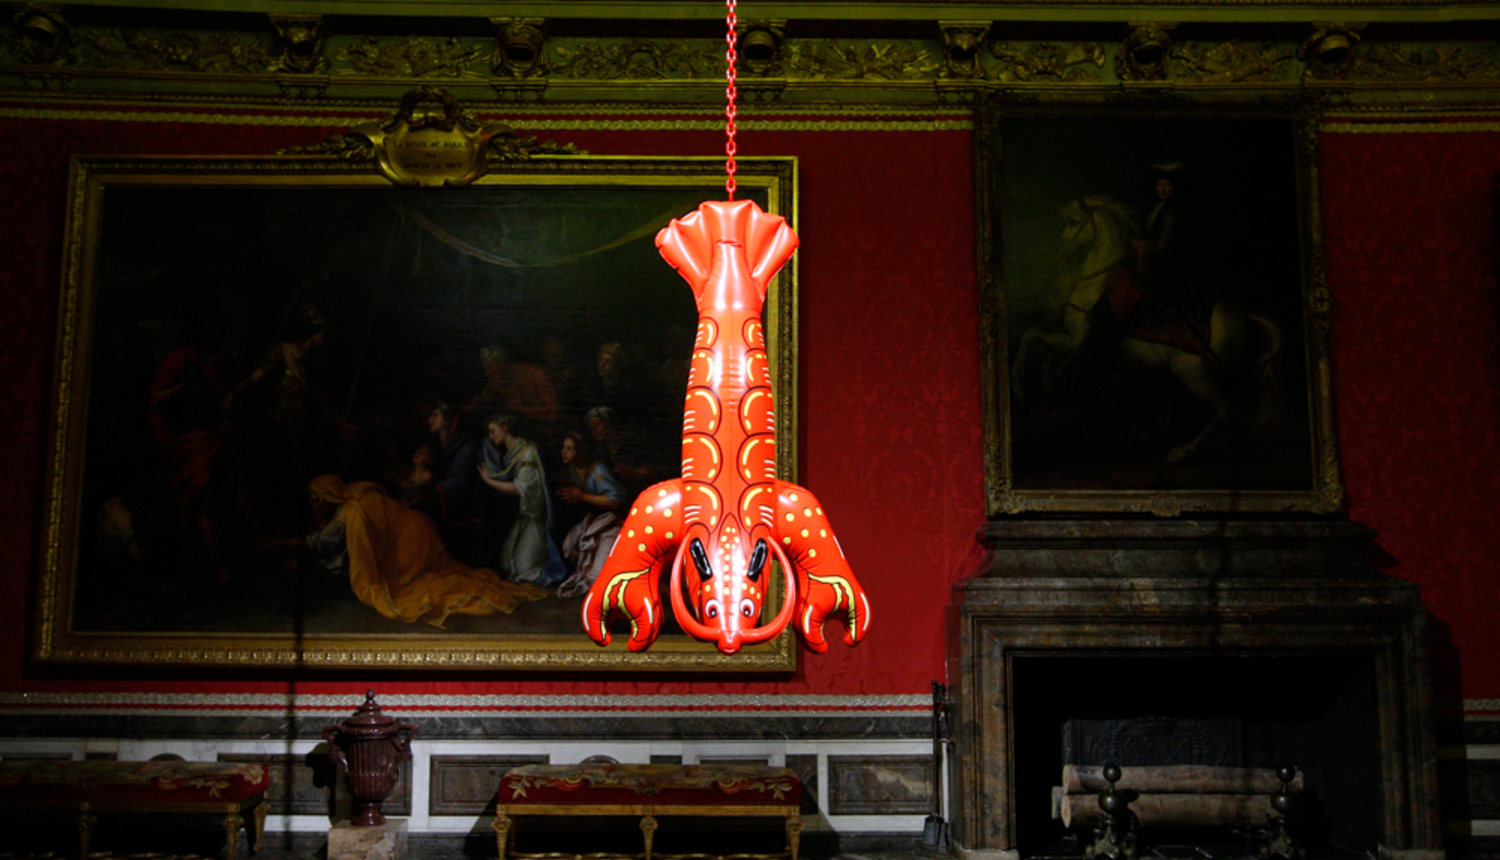 Are zany sculptures too kitsch for Versailles?